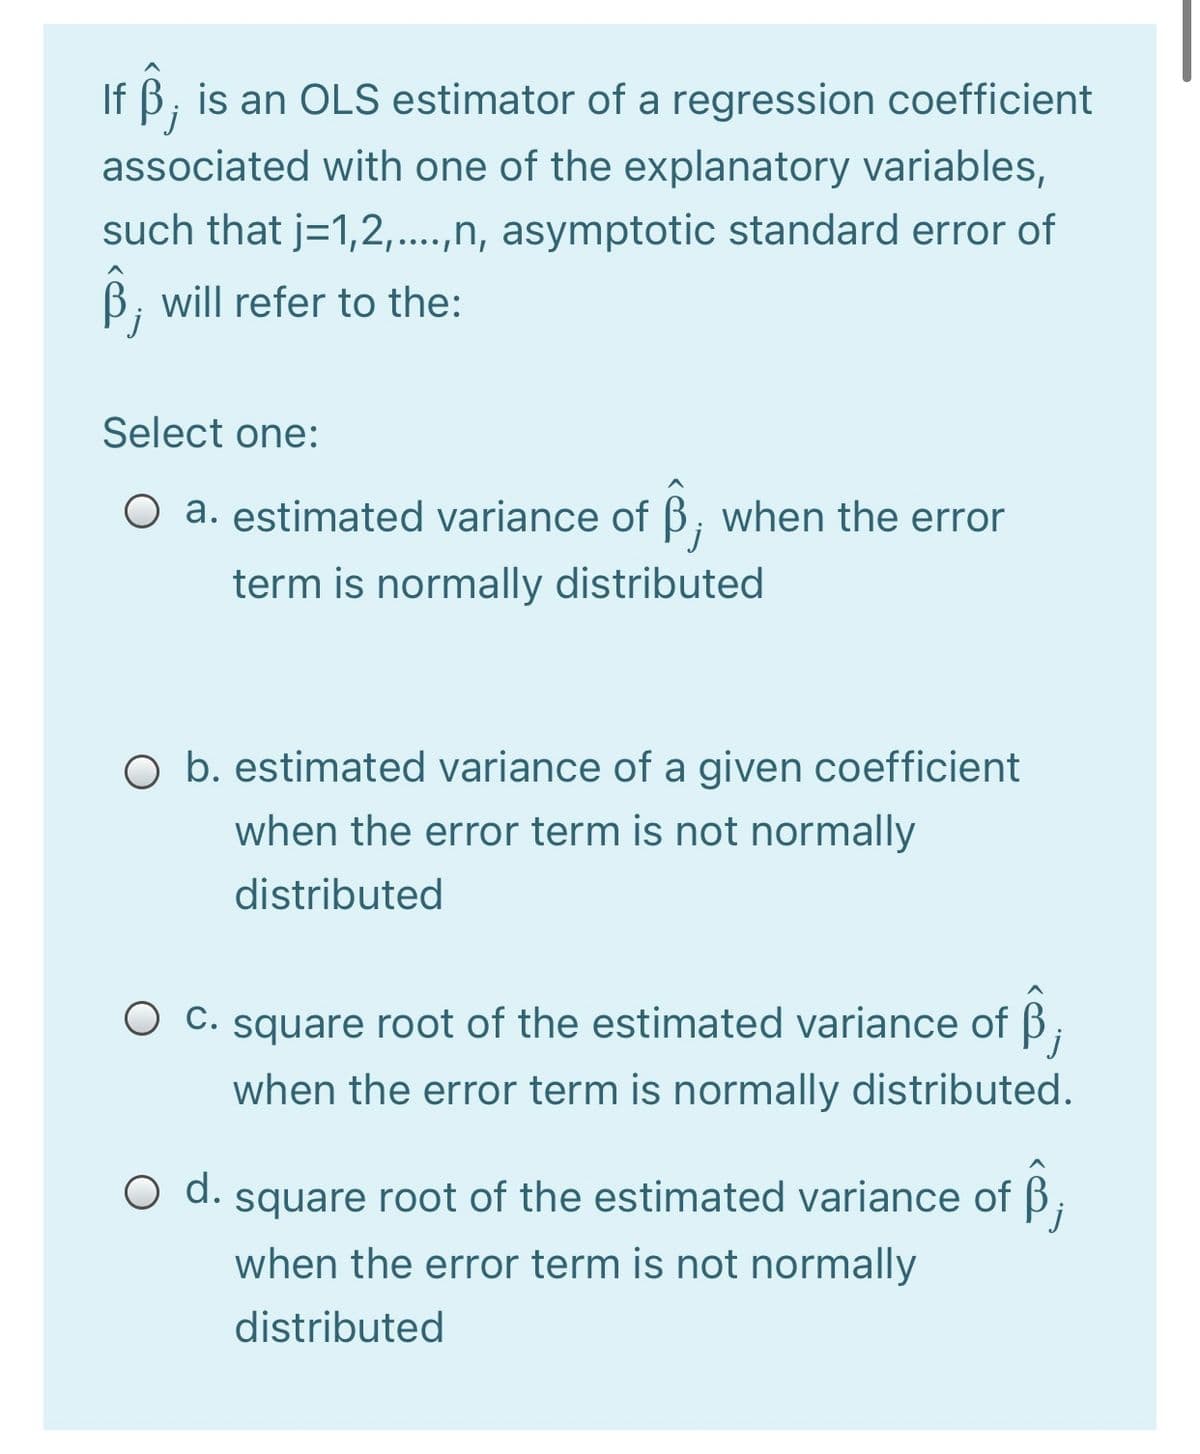 If B, is an OLS estimator of a regression coefficient
'j
associated with one of the explanatory variables,
such that j=1,2,..,n, asymptotic standard error of
B, ill refer to the:
Select one:
O a. estimated variance of B, when the error
term is normally distributed
O b. estimated variance of a given coefficient
when the error term is not normally
distributed
O C. square root of the estimated variance of B.
j
when the error term is normally distributed.
d.
O d. square root of the estimated variance of B;
when the error term is not normally
distributed
